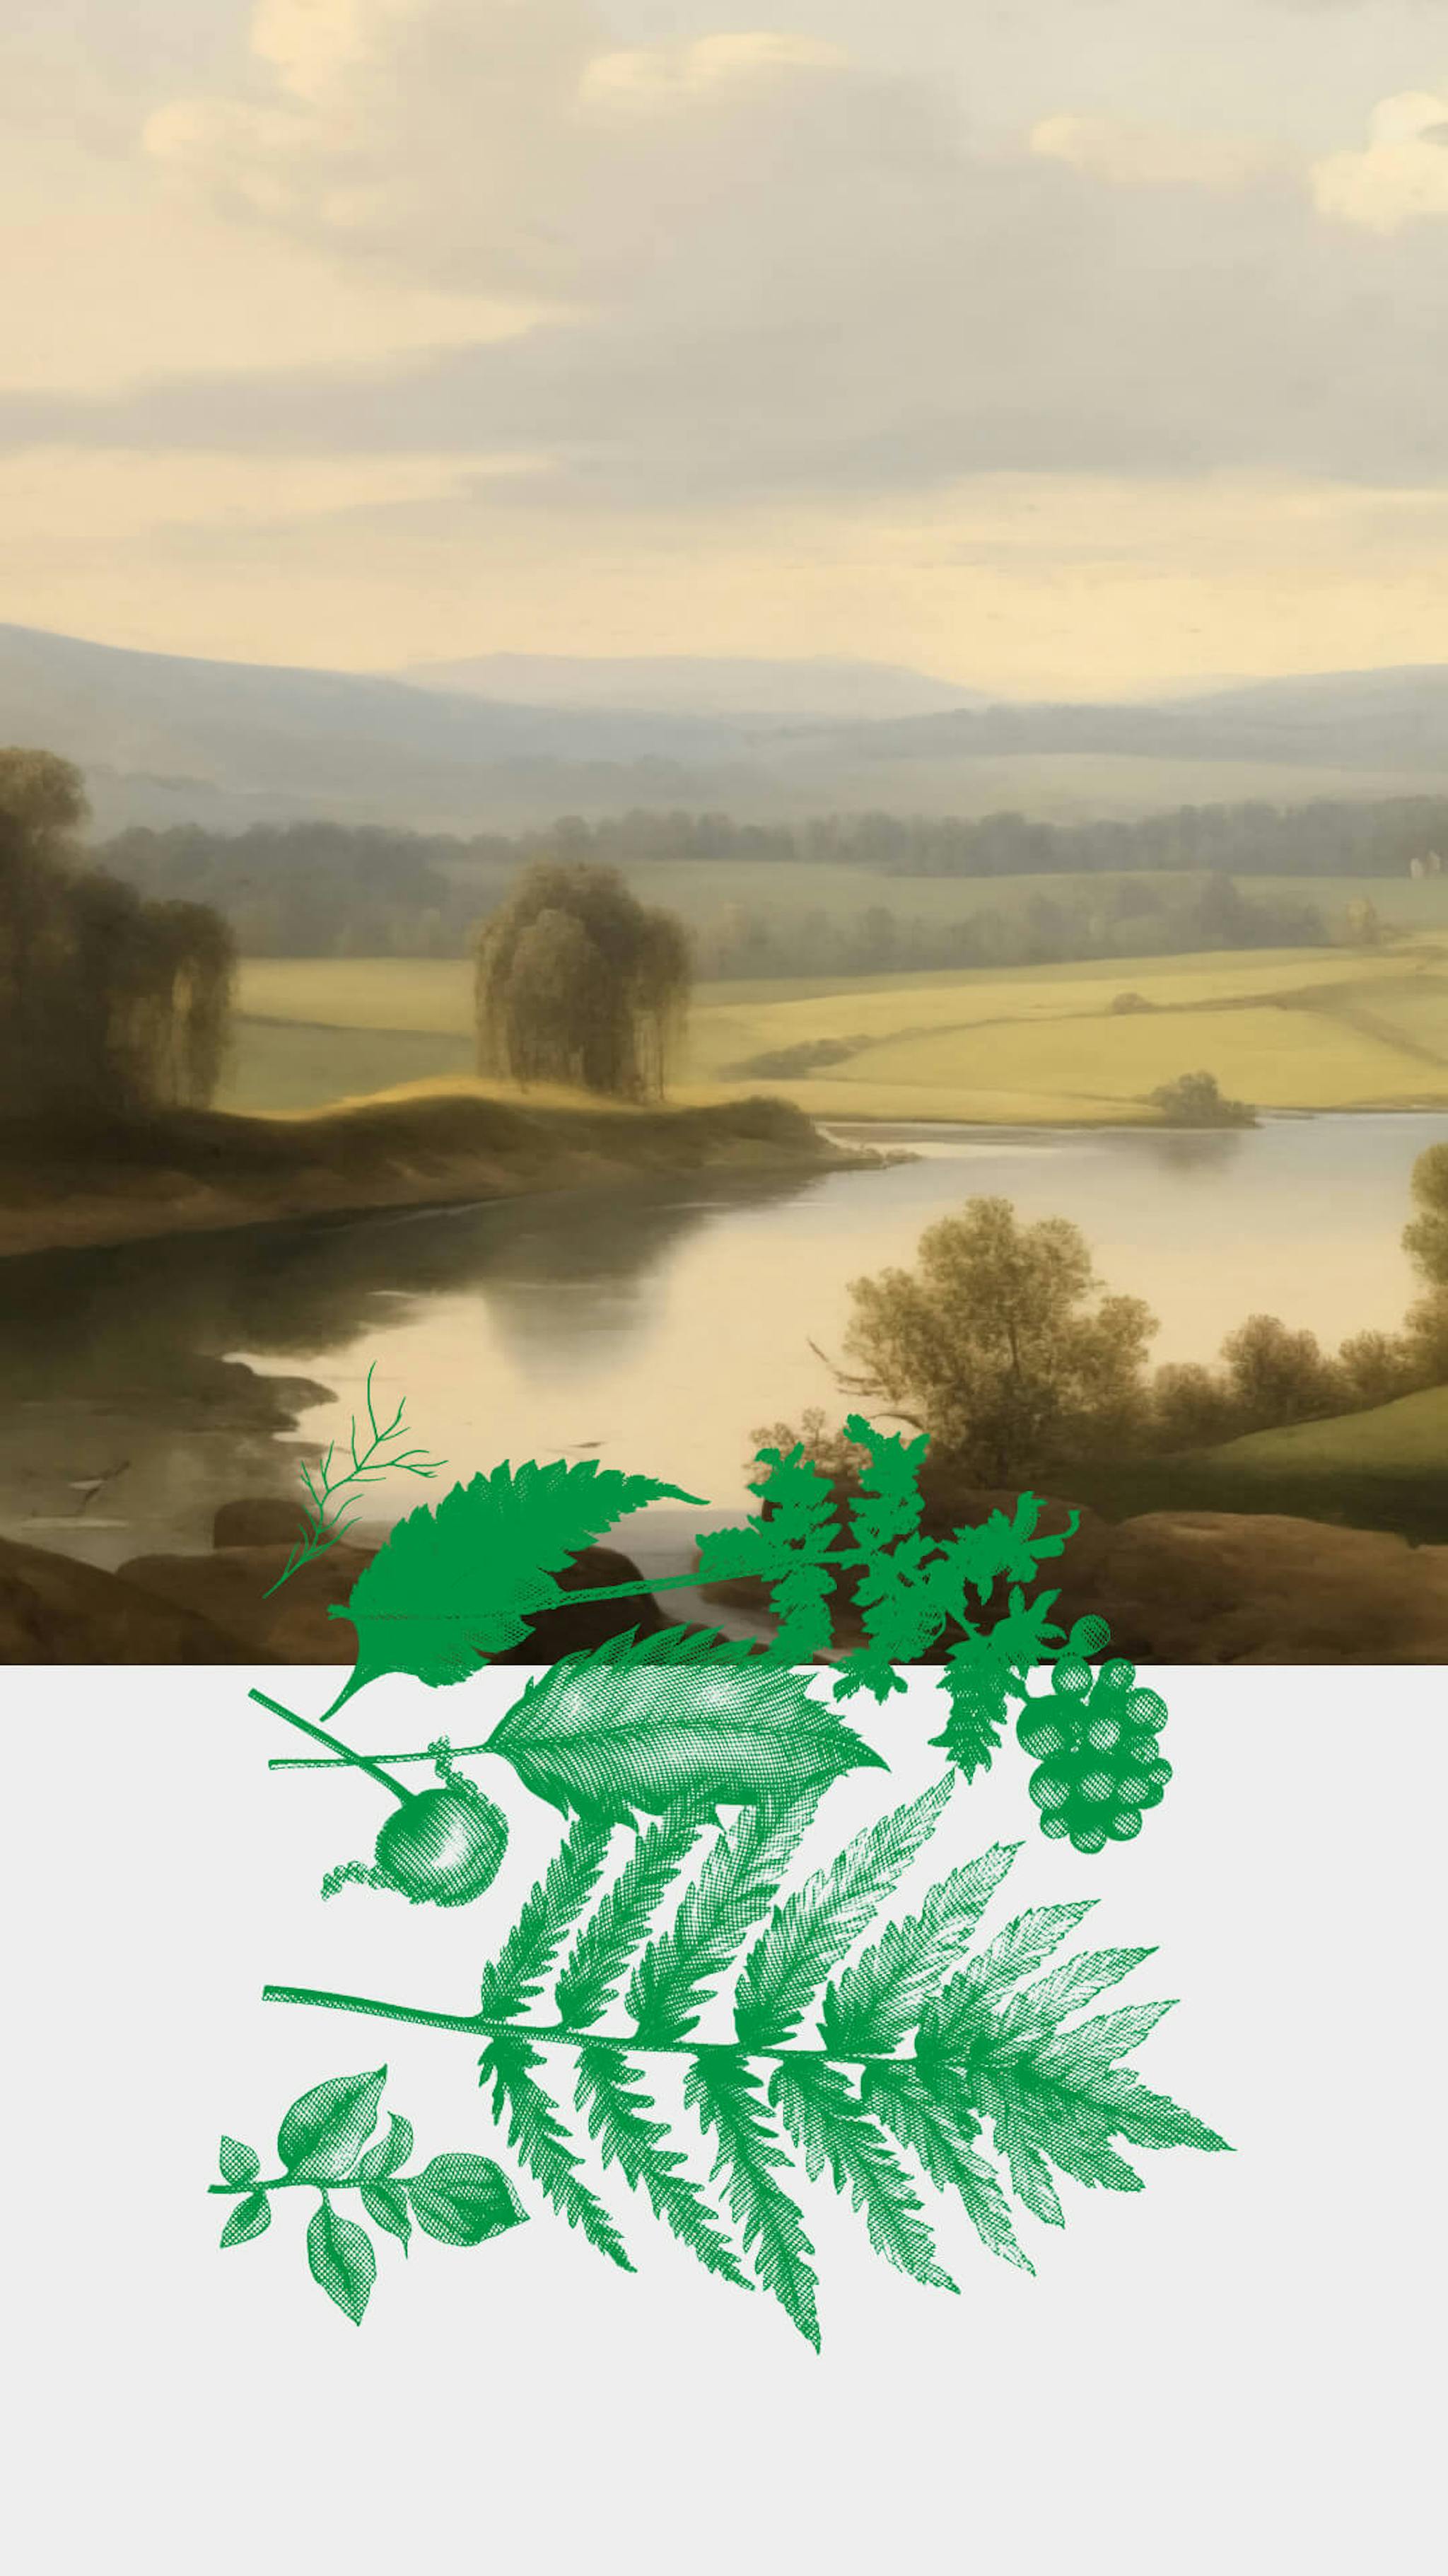 A composite image with a pastoral landscape on the top and detailed botanical illustrations on the bottom.